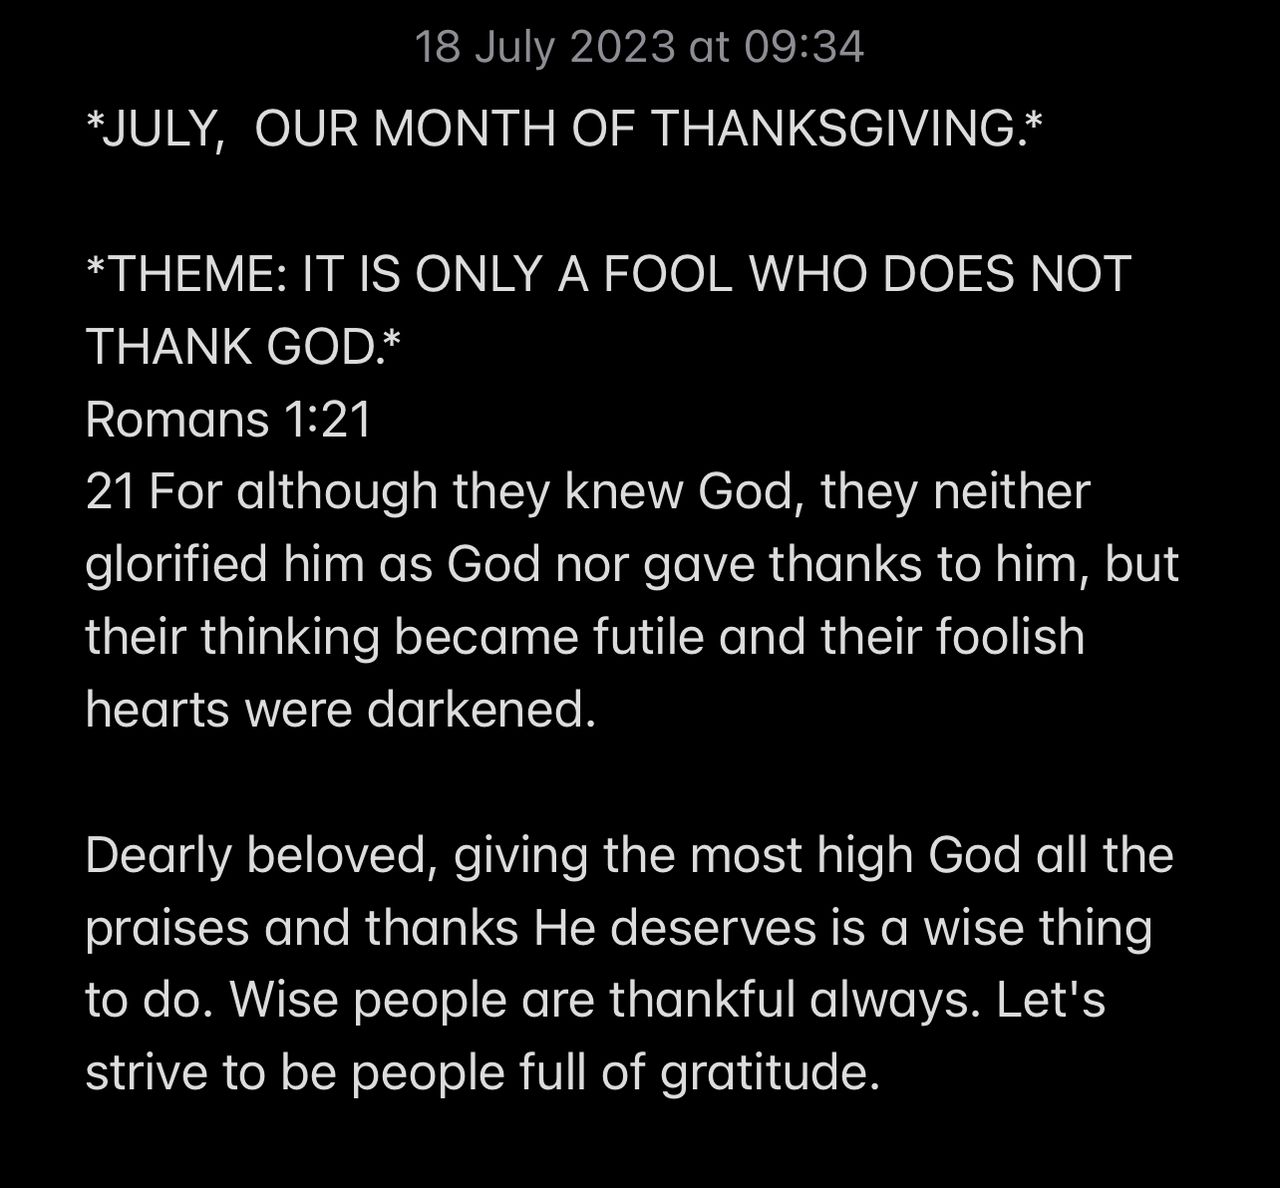 IT IS ONLY A FOOL WHO DOES NOT THANK GOD.